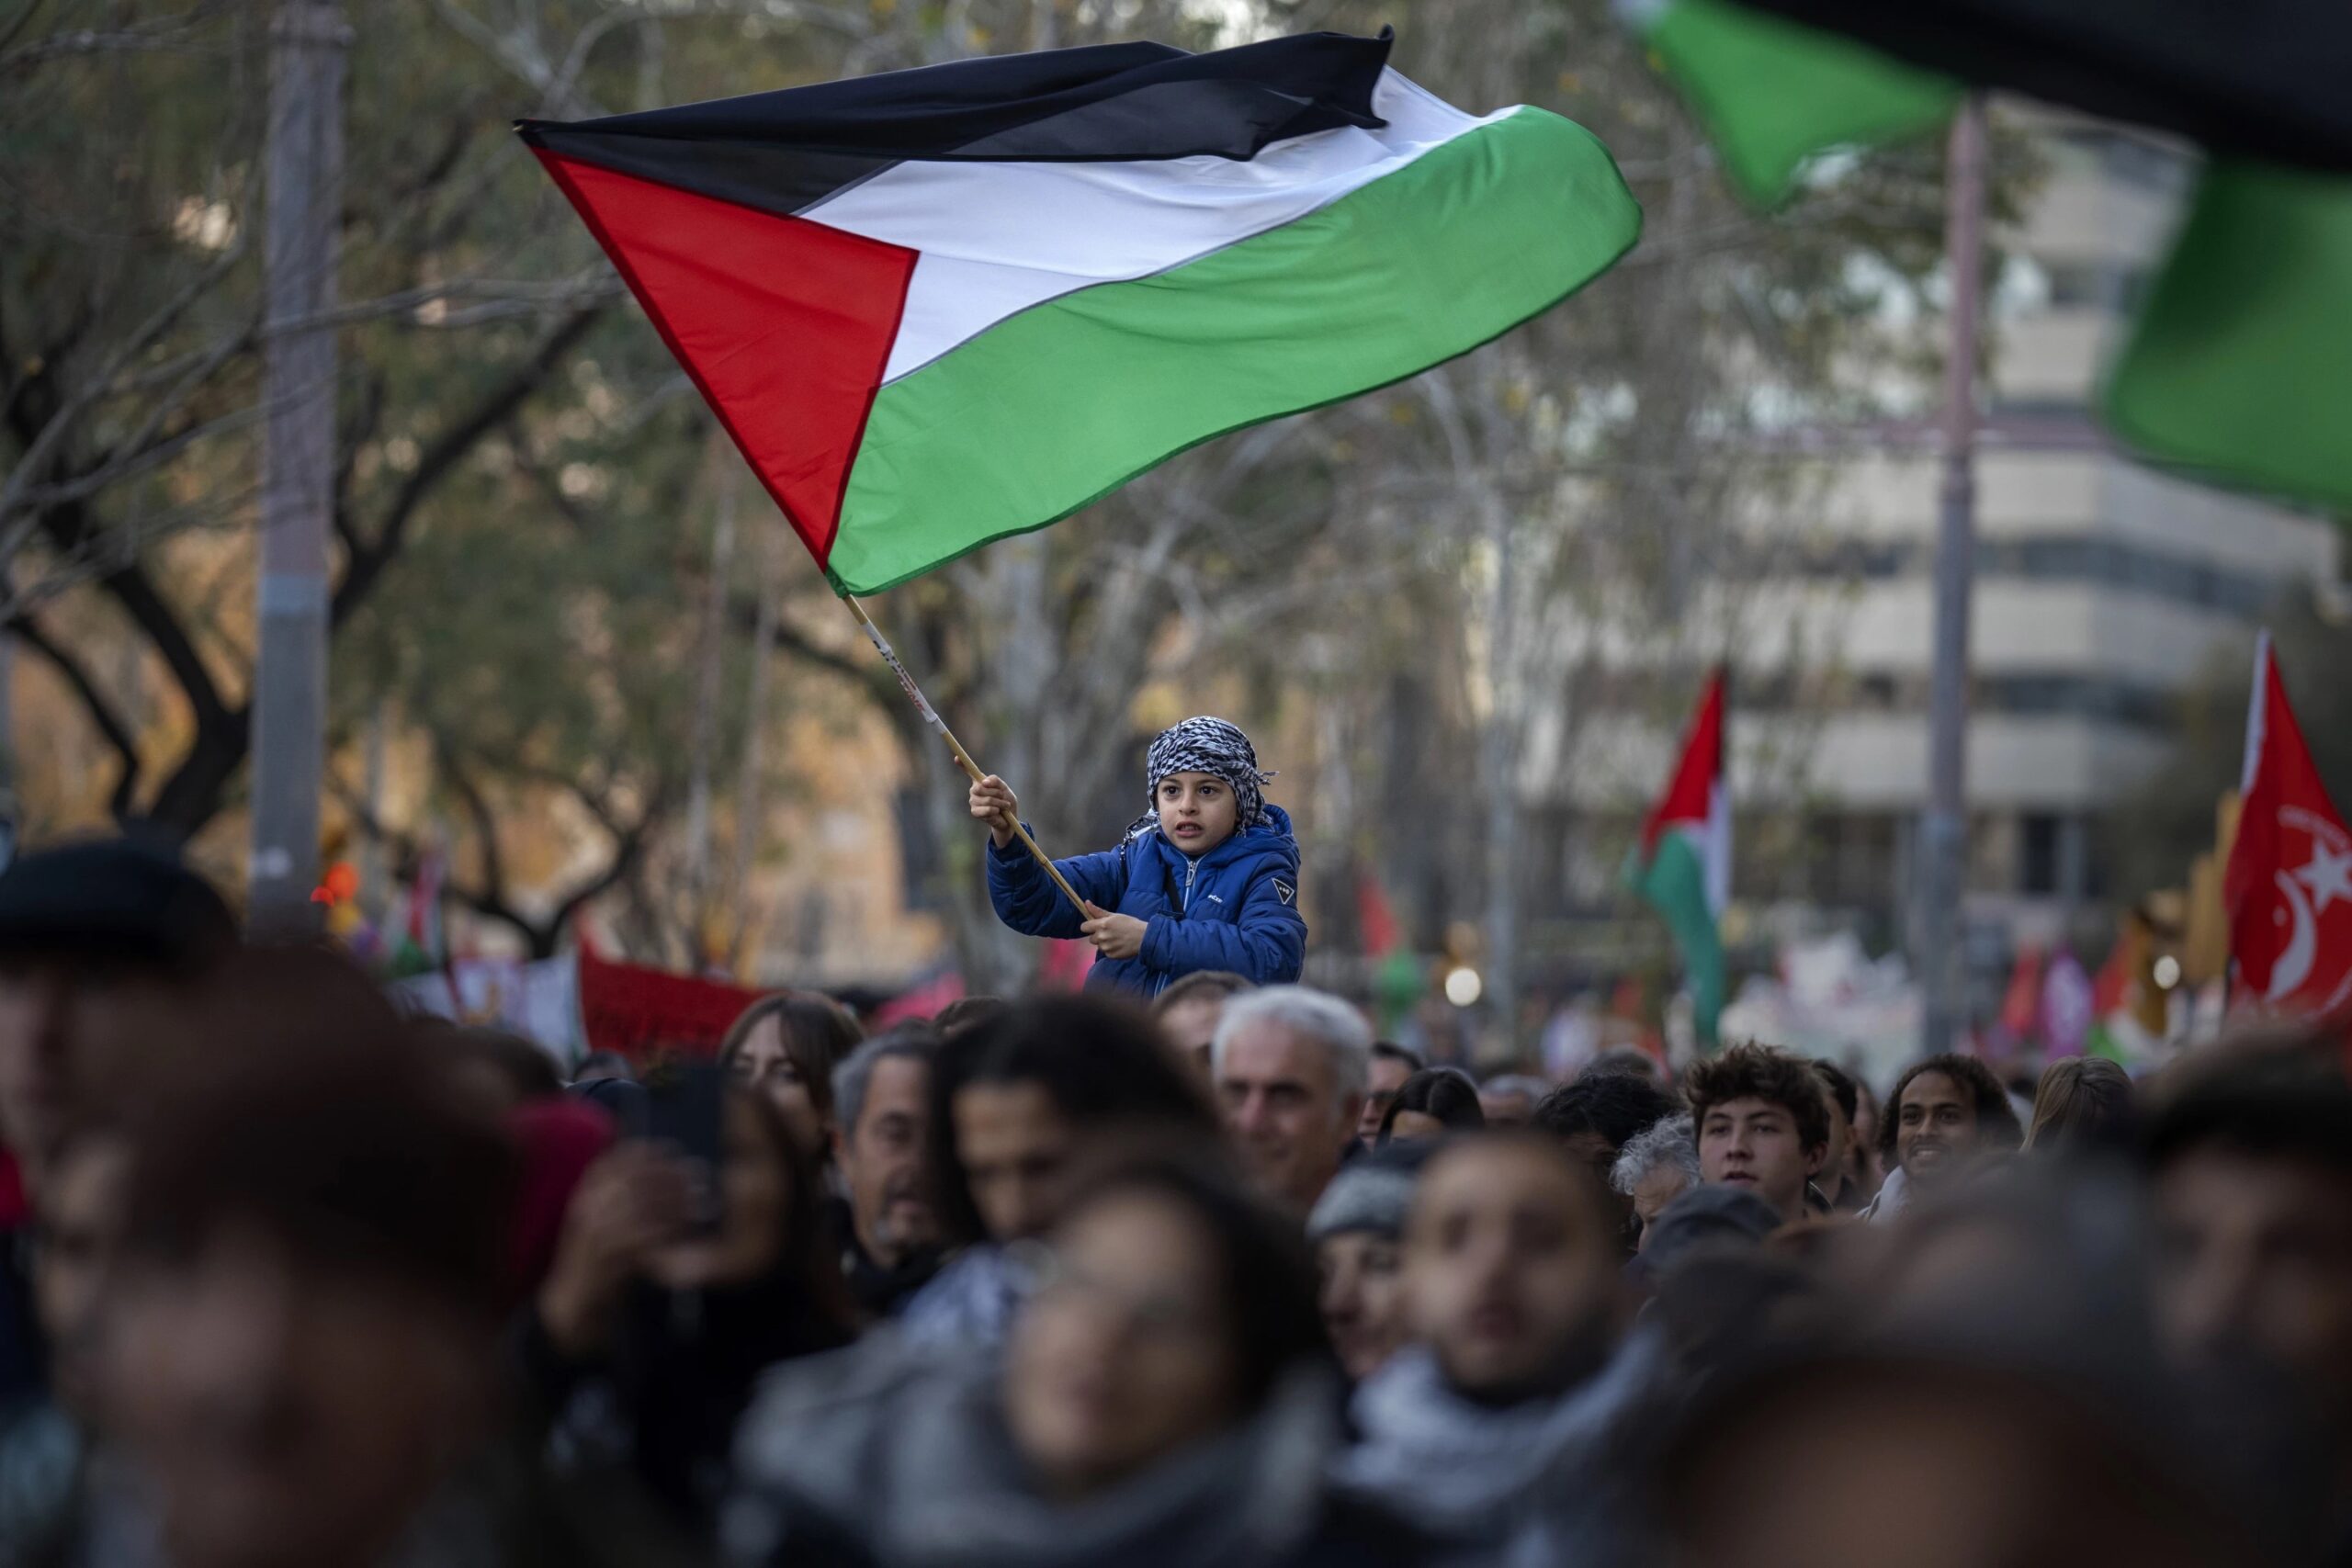 A boy waves a Palestinian flag as demonstrators march during a protest in support of Palestinians and calling for an immediate ceasefire in Gaza, in Barcelona, Spain, on Jan. 20, 2024. European Union countries Spain and Ireland as well as Norway on Wednesday announced dates for recognizing Palestine as a state. 
